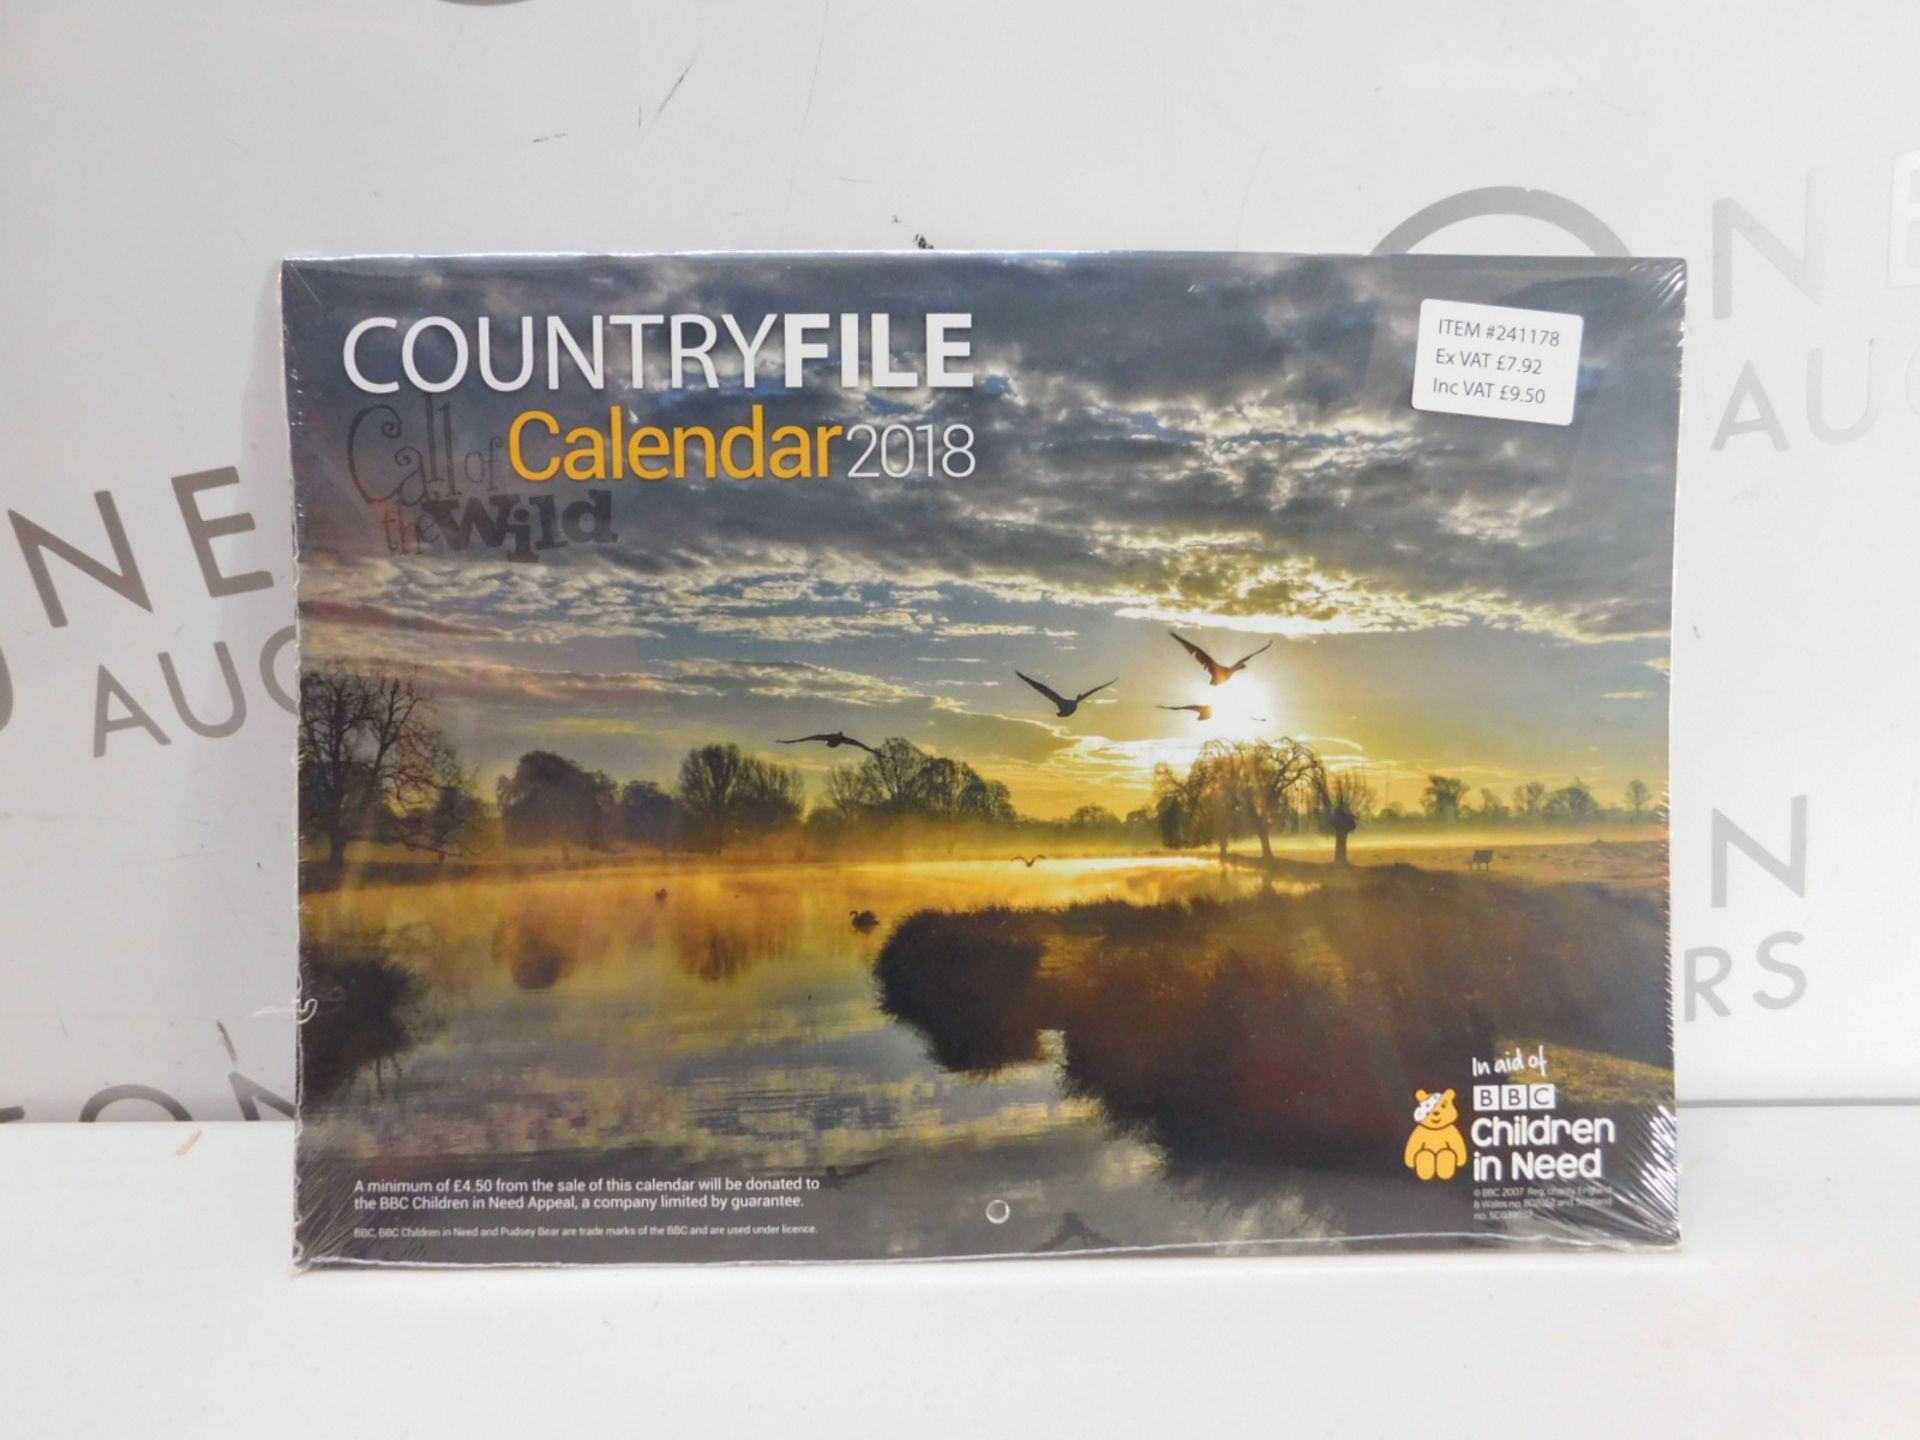 4 BRAND NEW SEALED COUNTRYFILE 2018 CALL OF THE WILD CALENDAR RRP £24.99